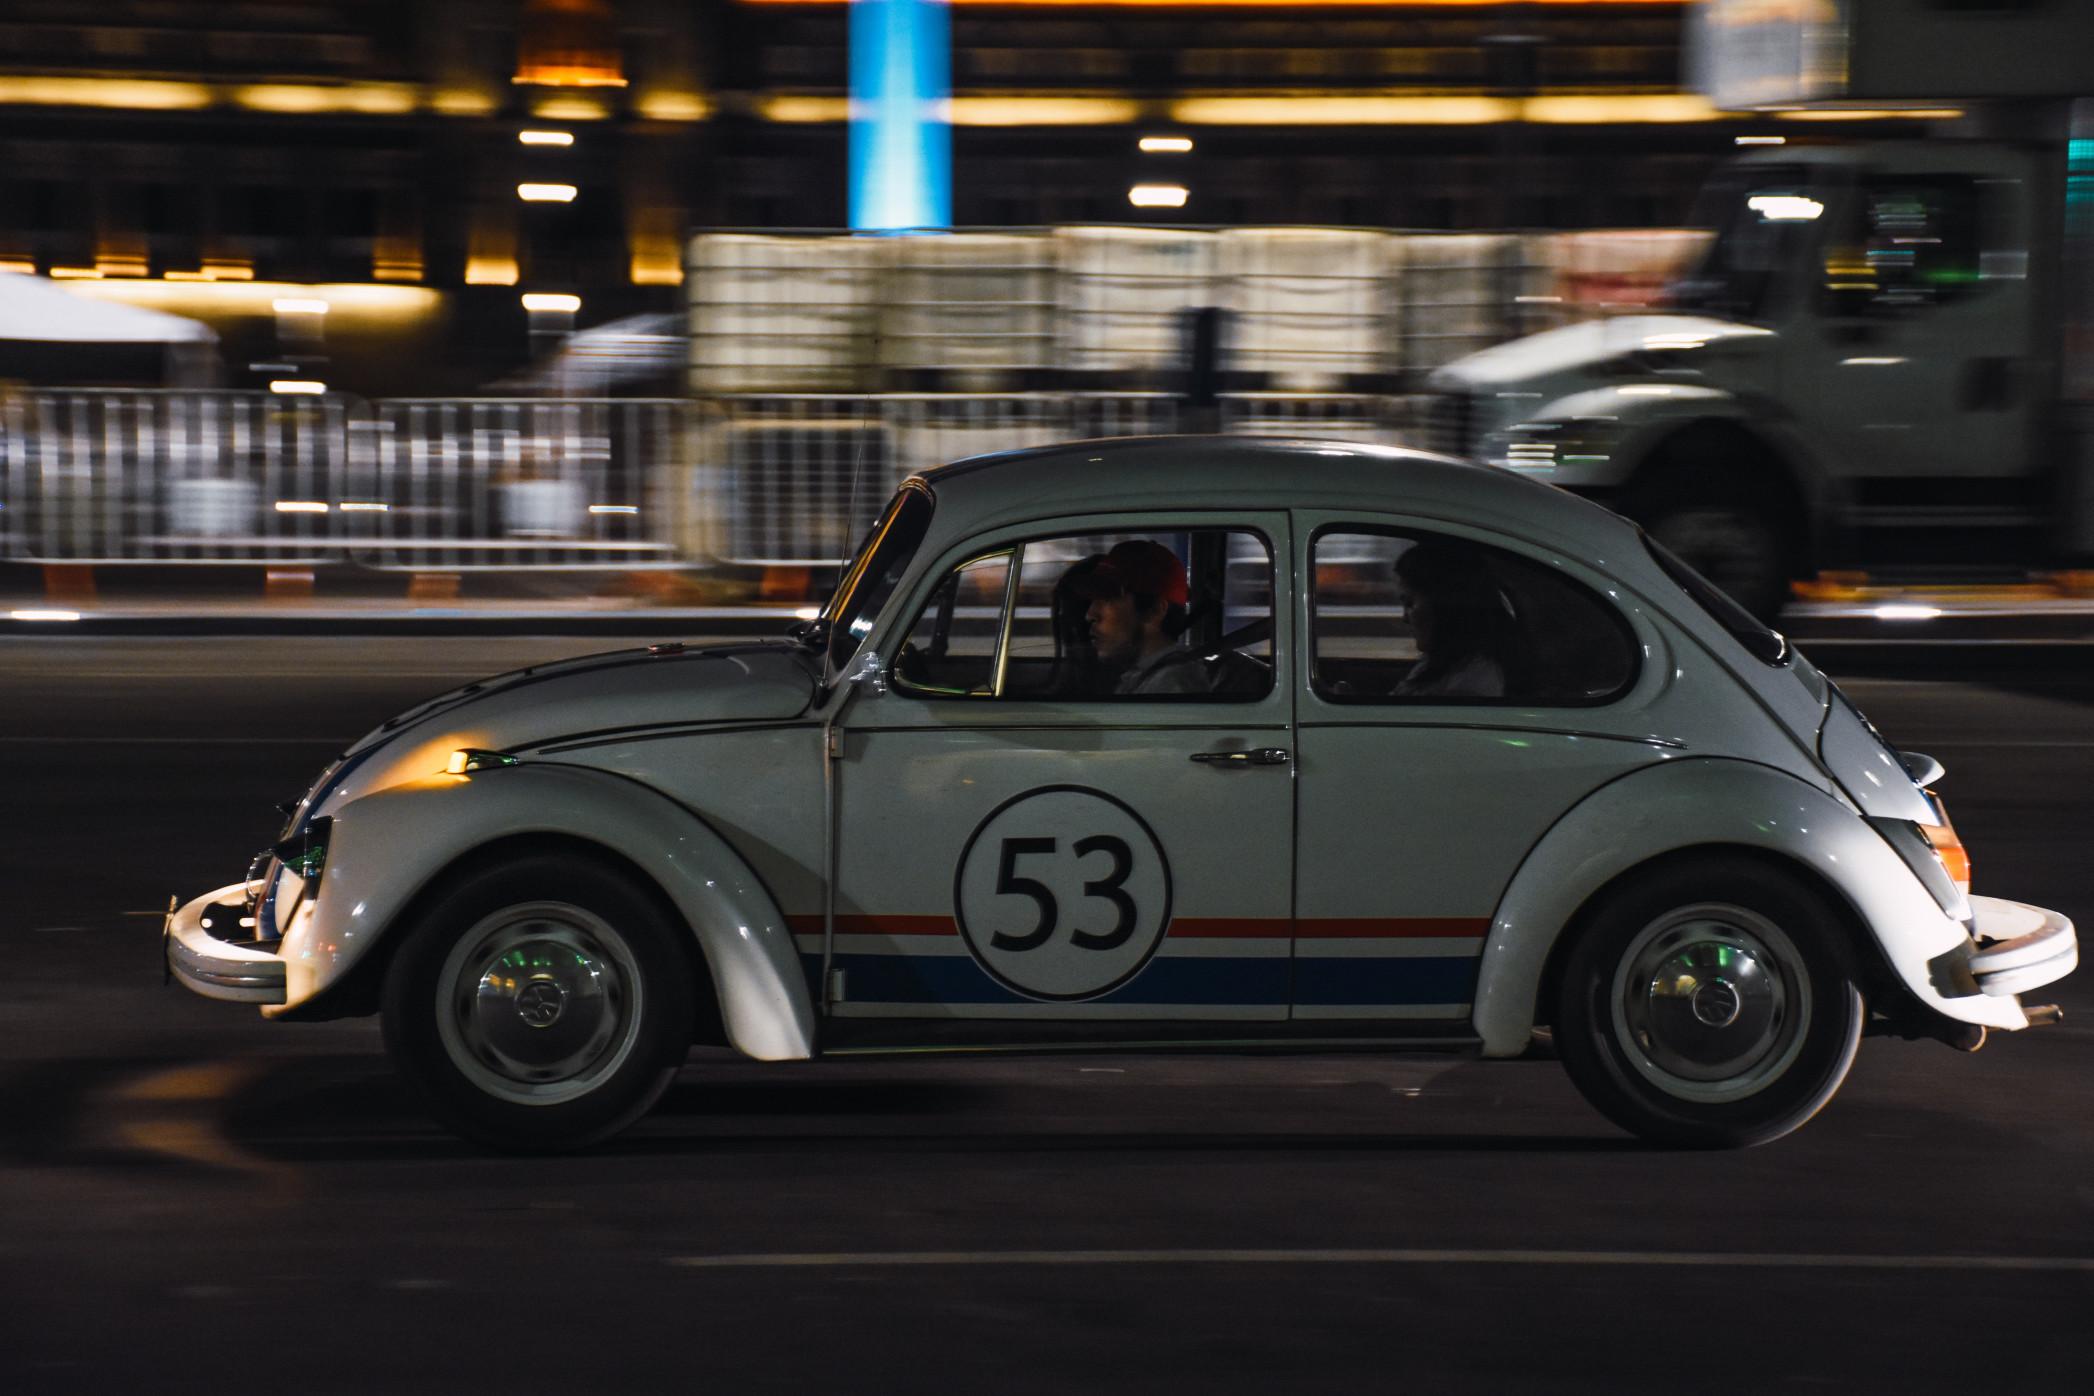 Herbie was the iconic VW Beetle that starred in “The Love Bug.”